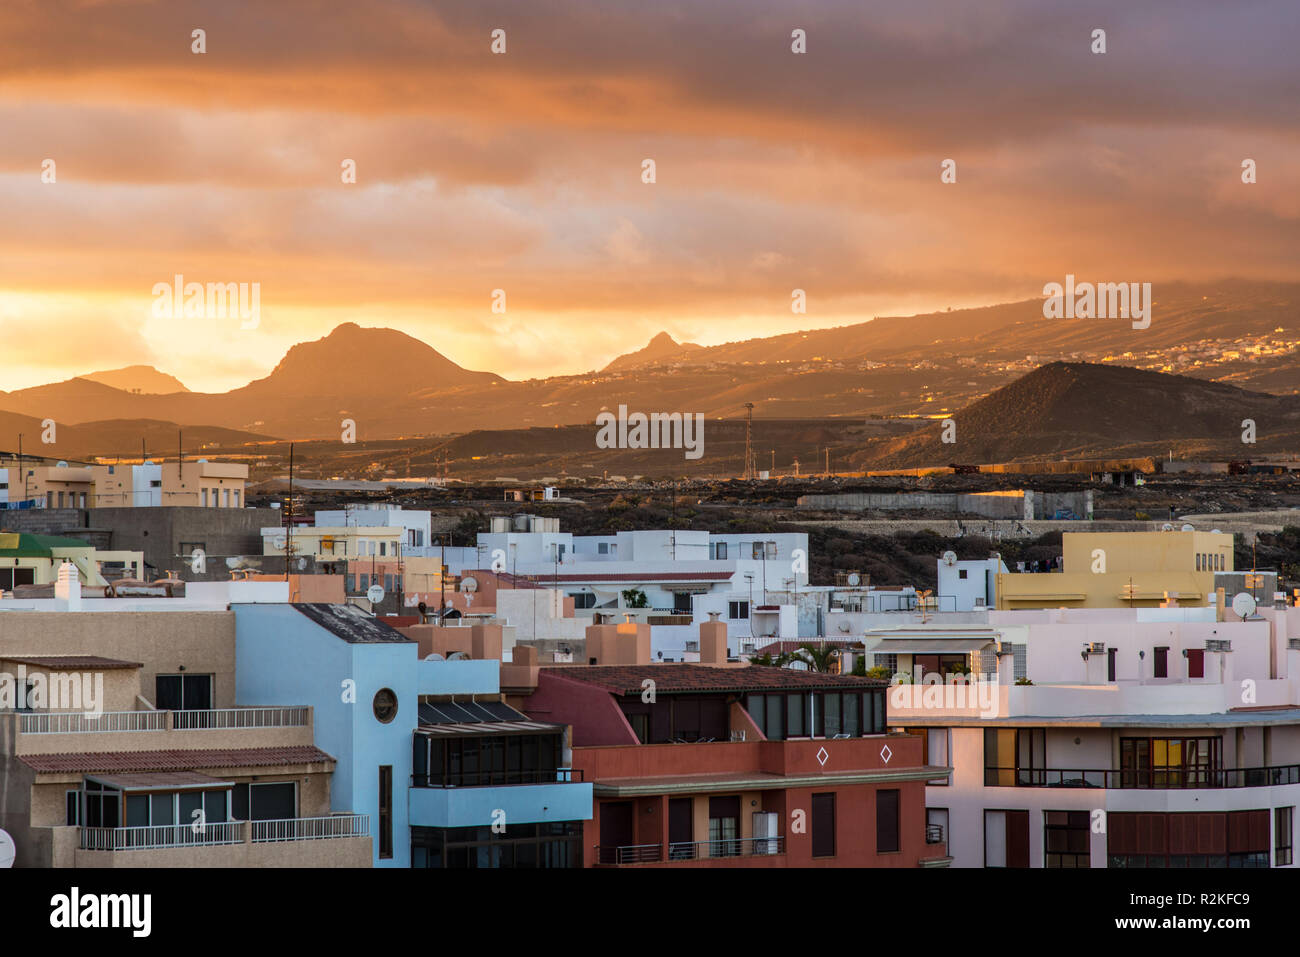 Building of the coastal town of El Medano at sunset in front of the volcanic landscape of Tenerife. Stock Photo